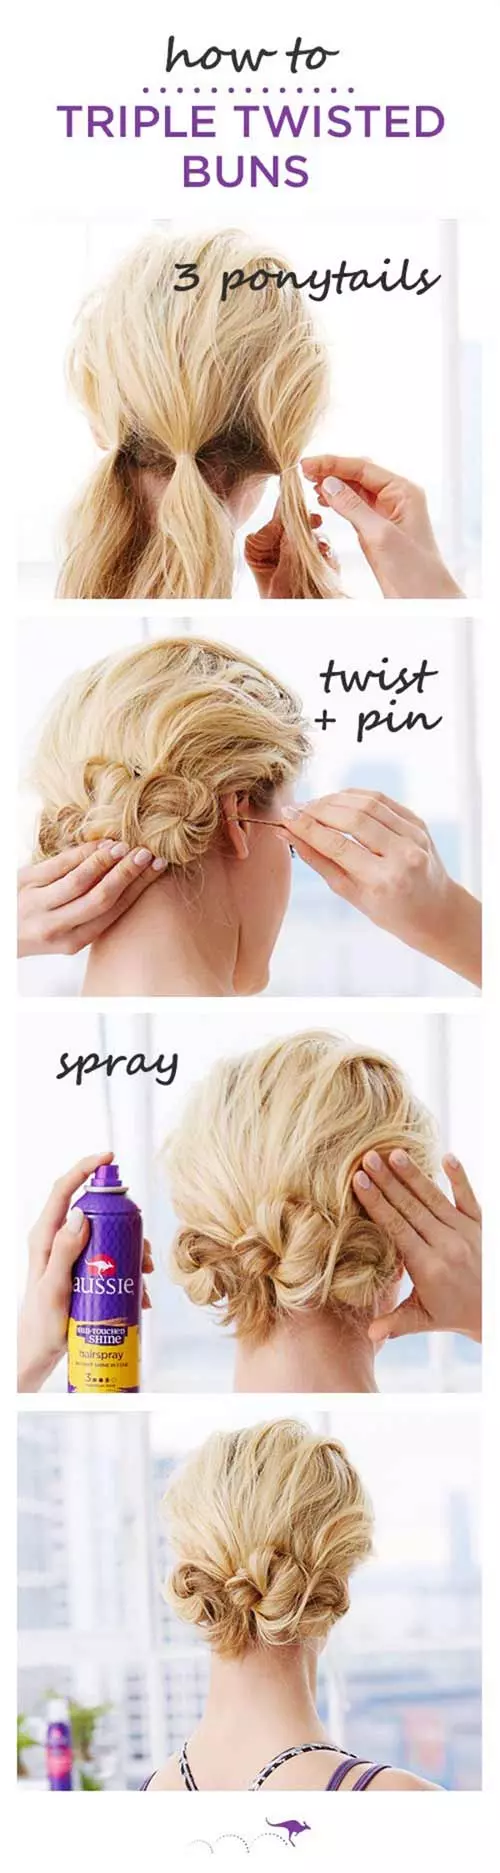 Triple twisted buns diy short hairstyle